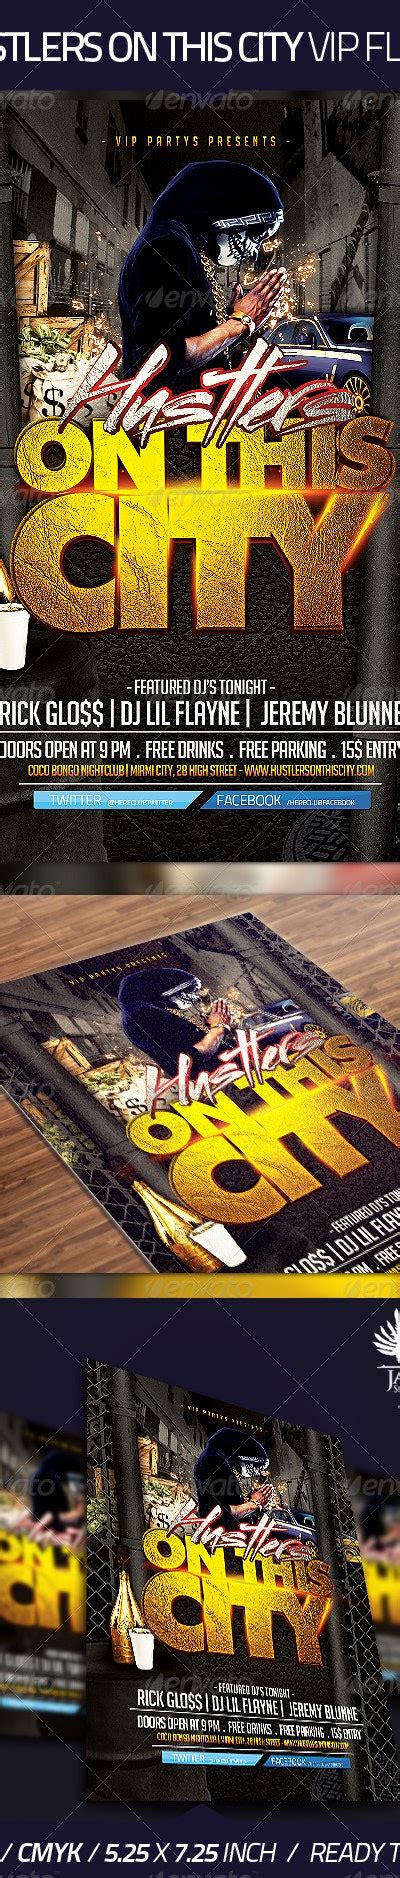 Hustlers on This City Flyer, Print Templates | GraphicRiver